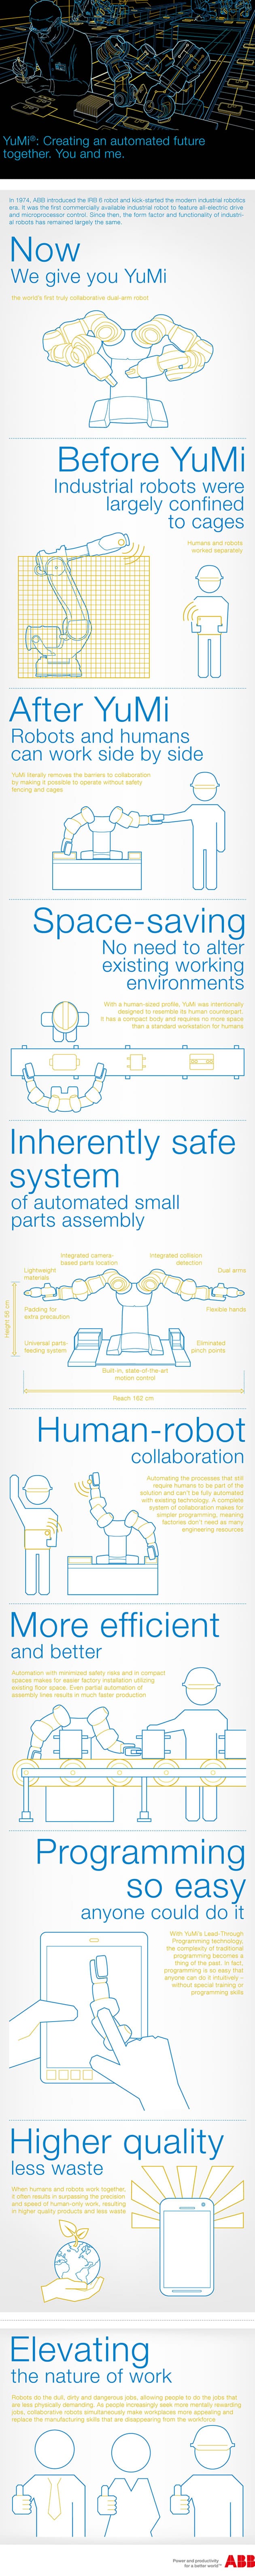 Yumi infographic by ABB showing the key traits of the collaborative robot and of benefits and characteristics of cobot in general - full version in PDF